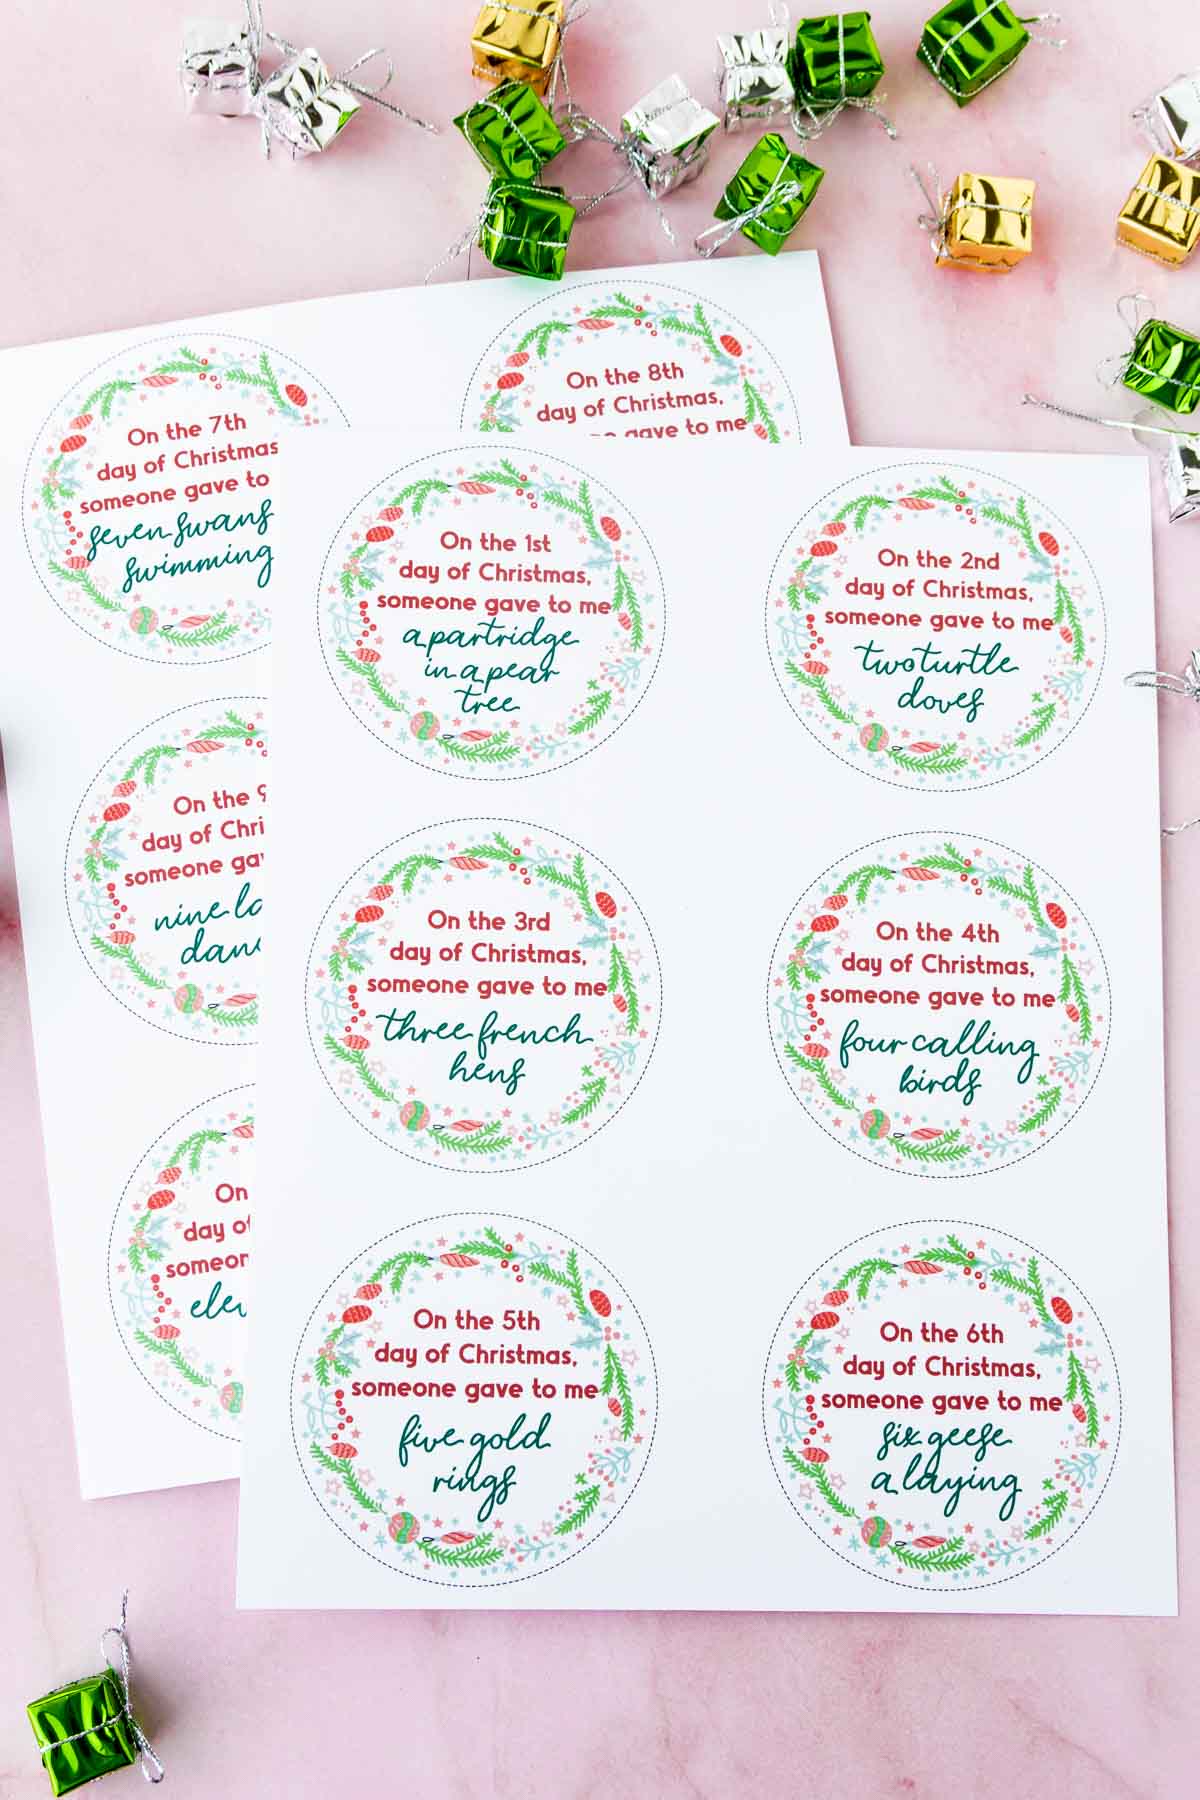 Creative 12 Days of Christmas Gifts   FREE Gift Tags - 72